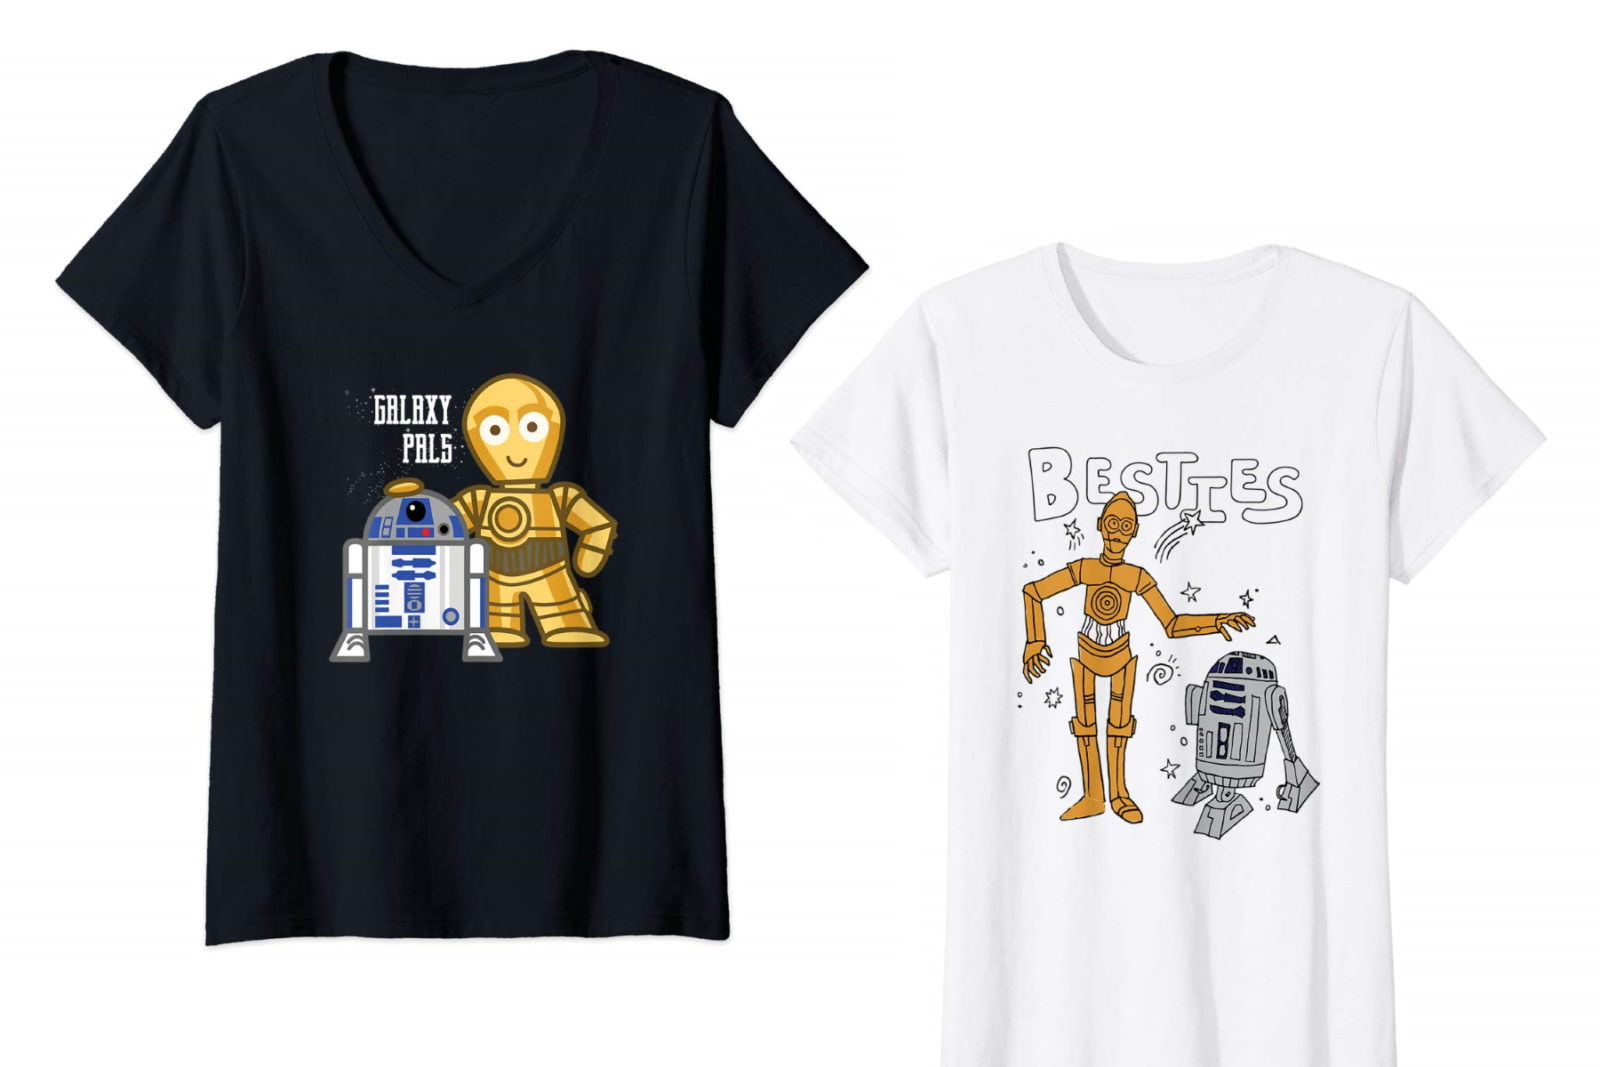 Celebrate Friendship Day with Star Wars Tees